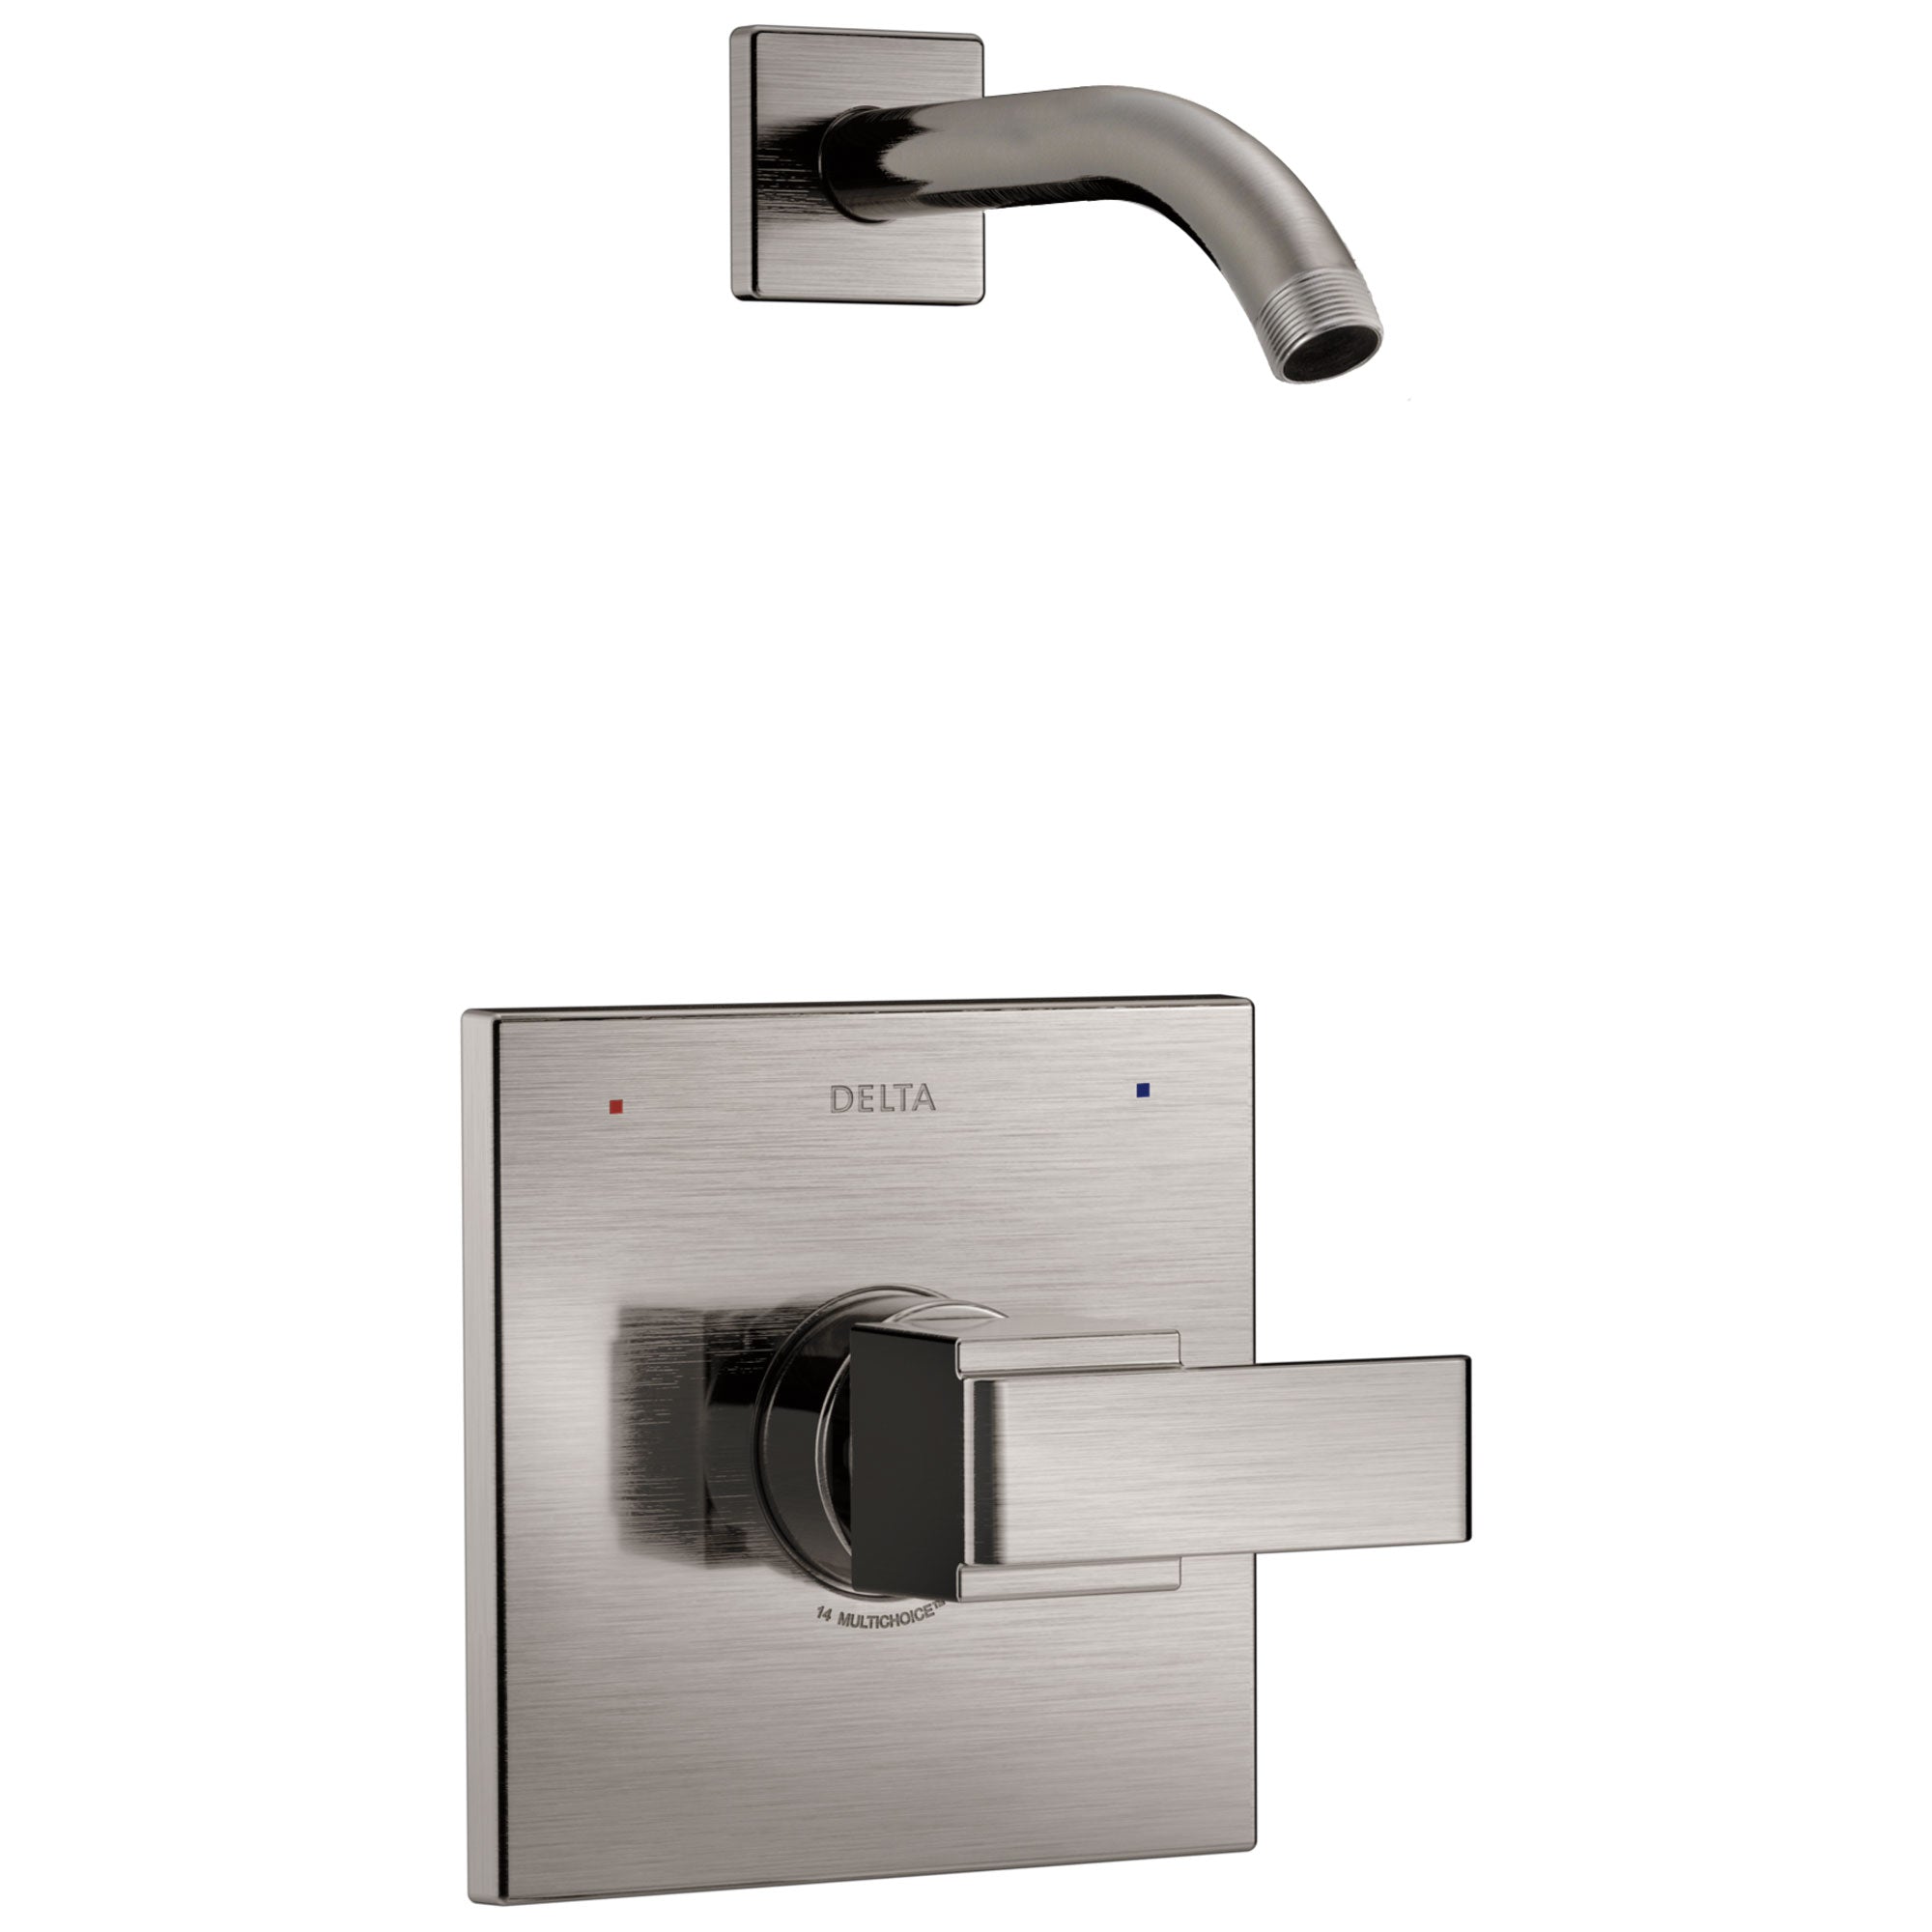 Delta Ara 1-Handle Shower Faucet Trim Kit in Stainless Steel Finish with Less Showerhead Includes Rough-in Valve without Stops D2562V